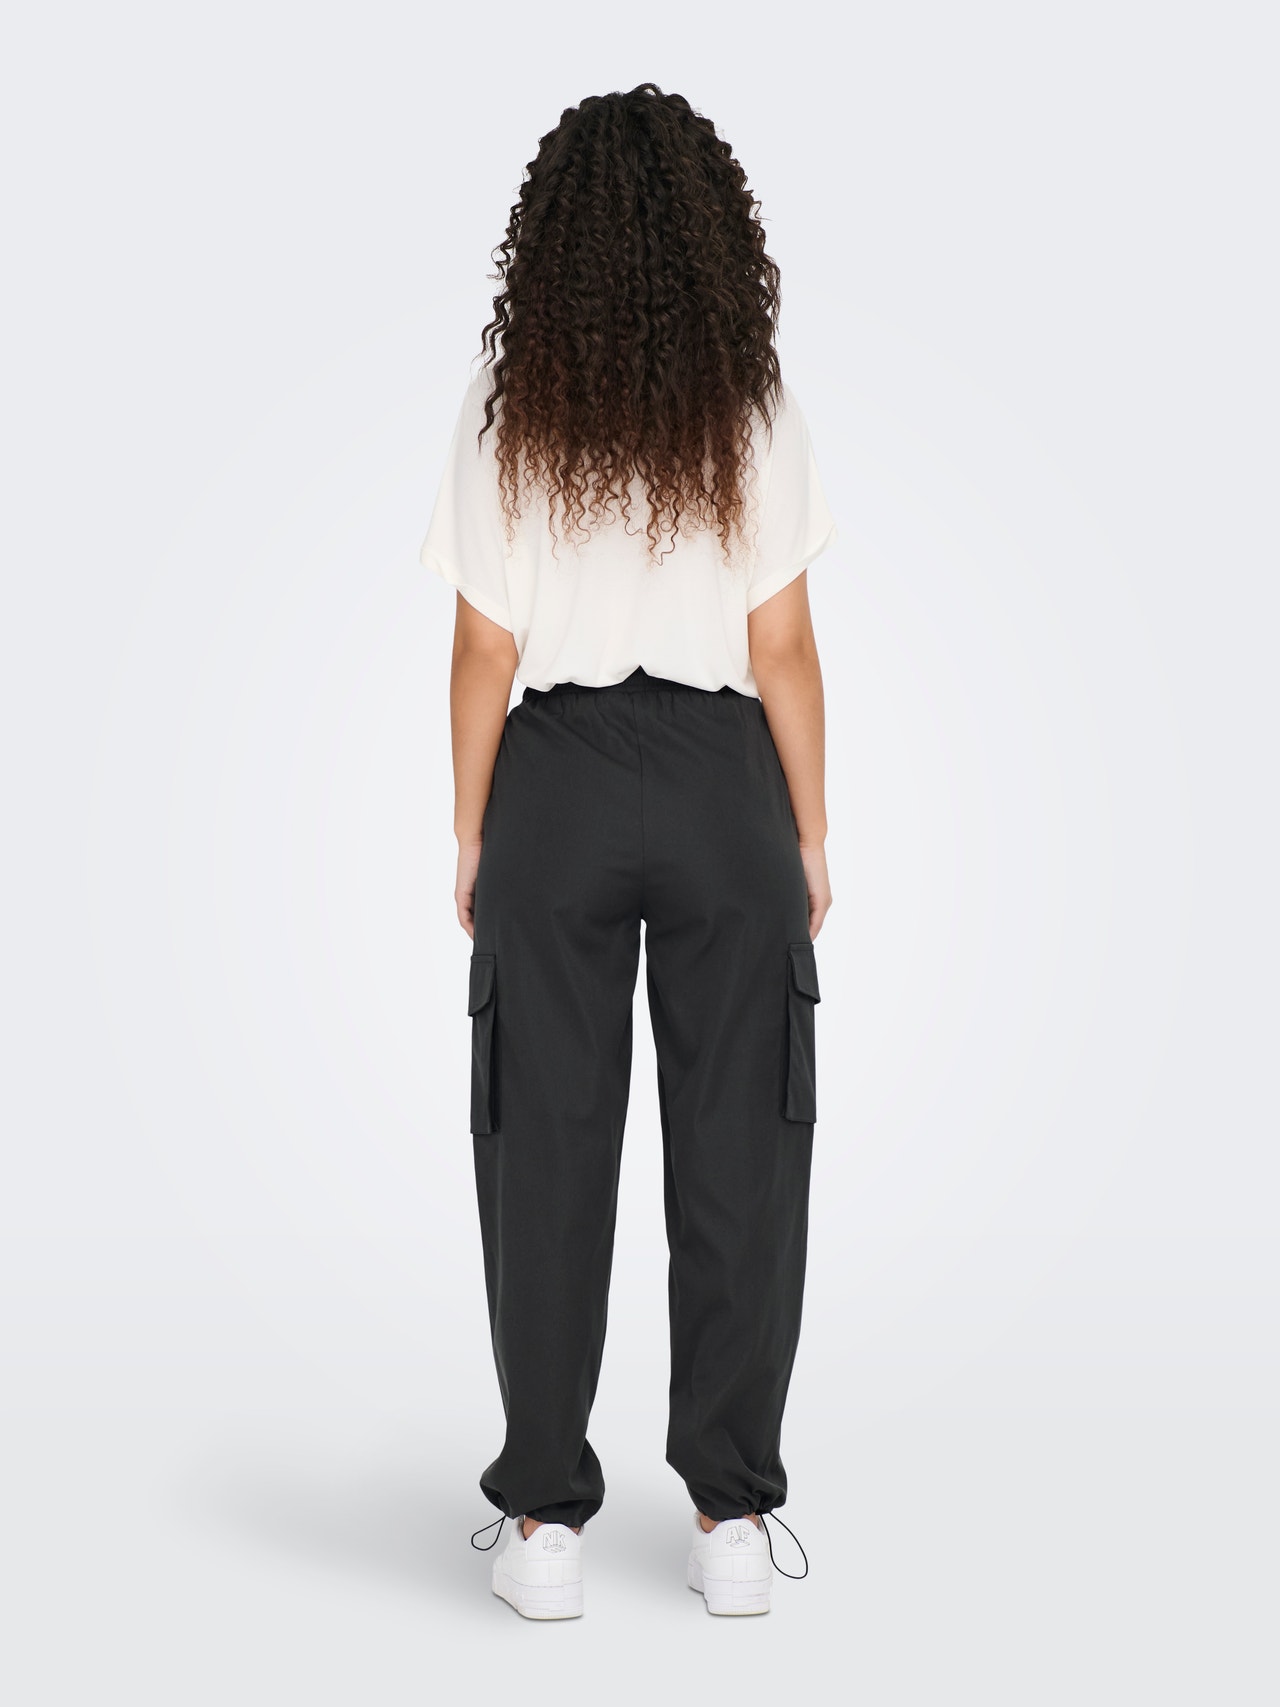 ONLY Cargo Pants With Strings -Raven - 15301004